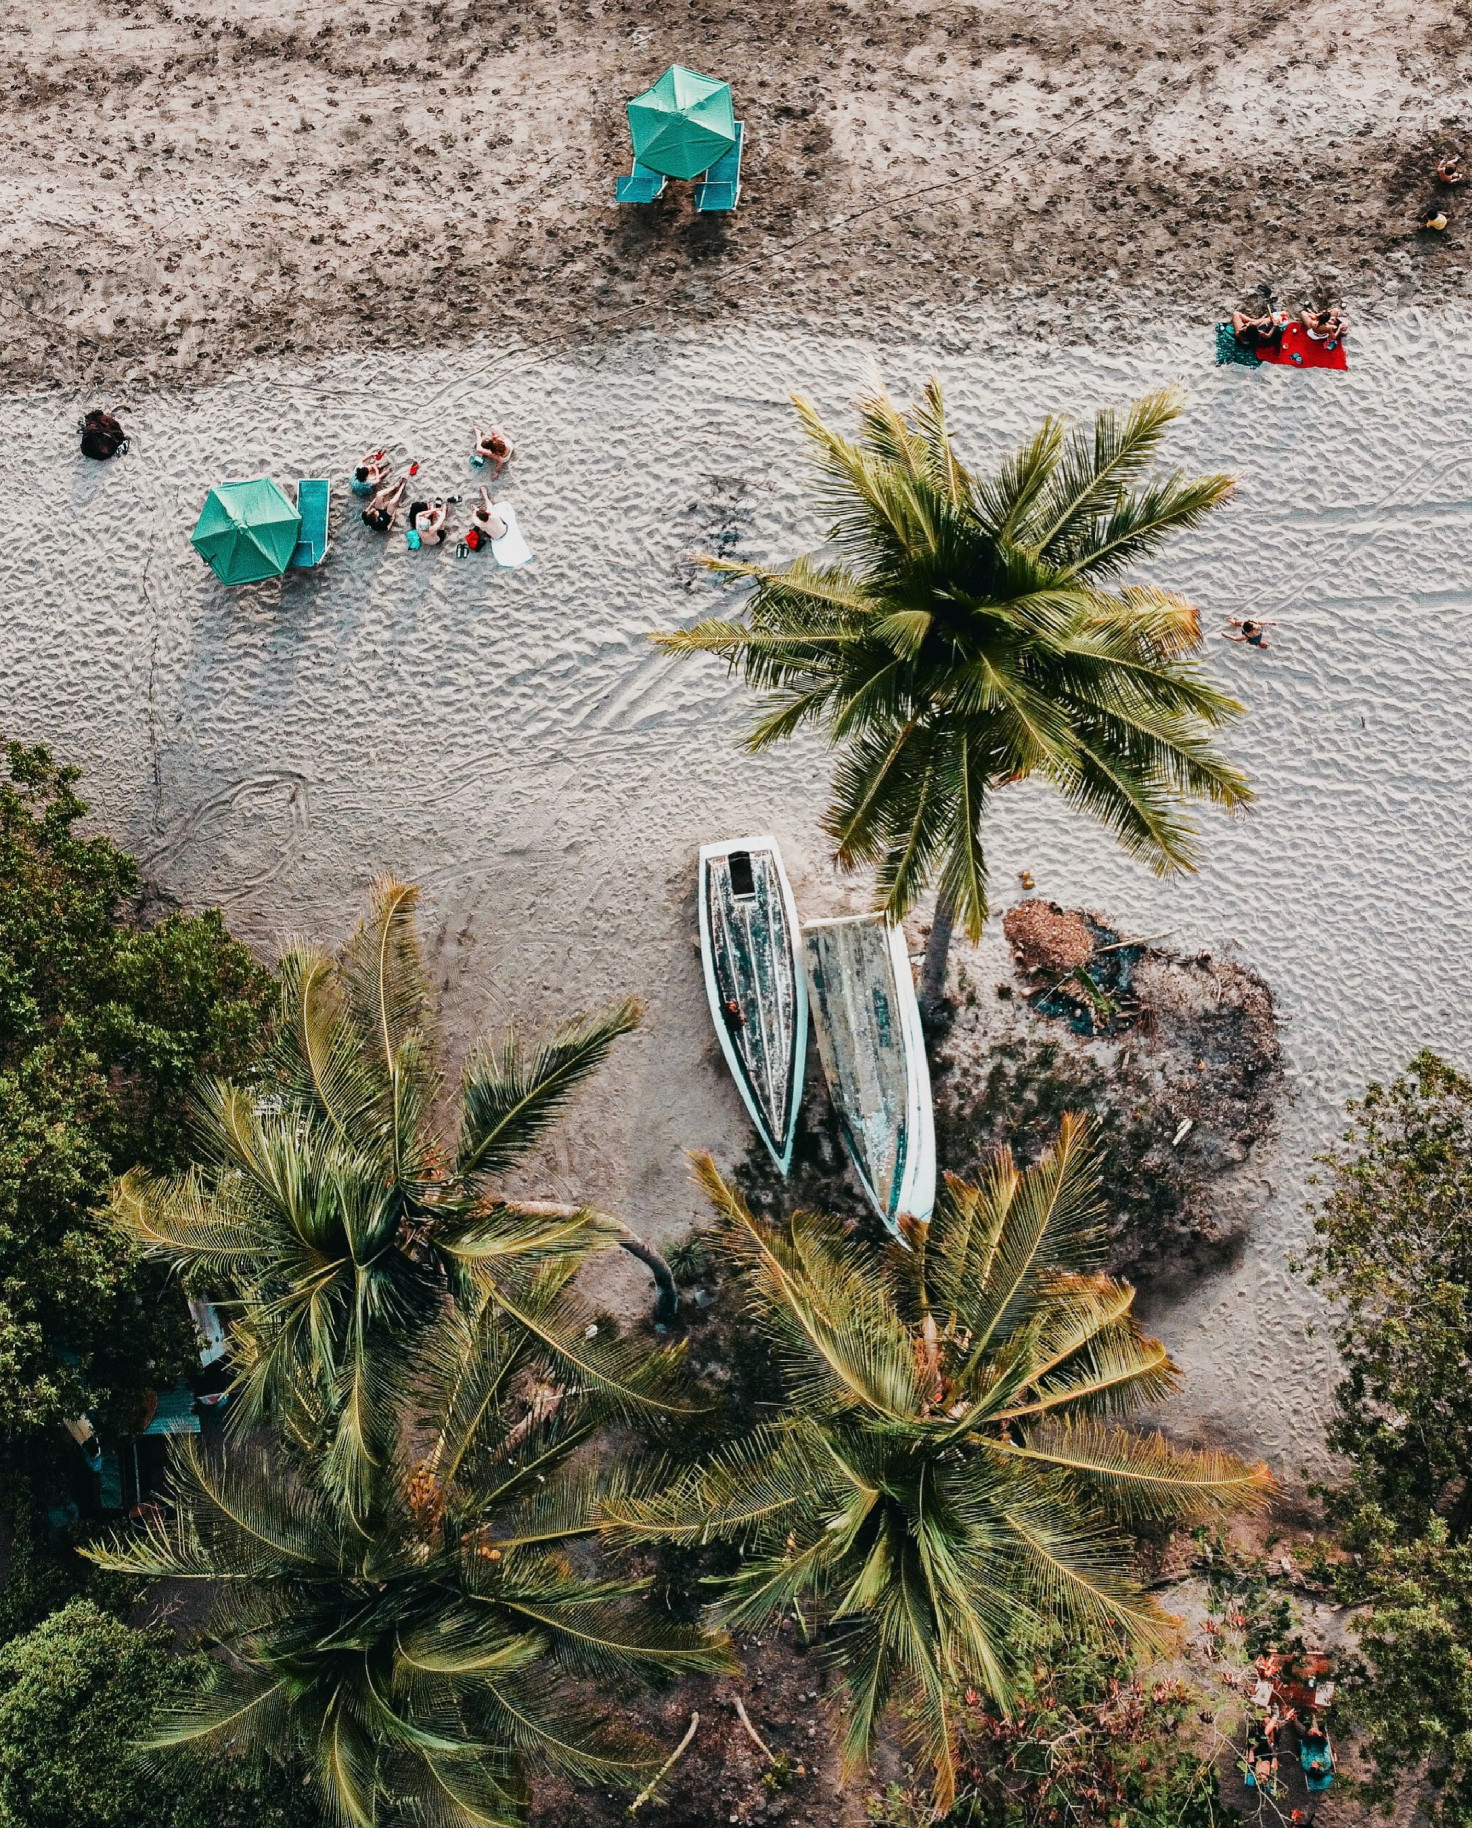 Aerial view of palm tree, beach umbrellas and kayaks on the beach in Costa Rica